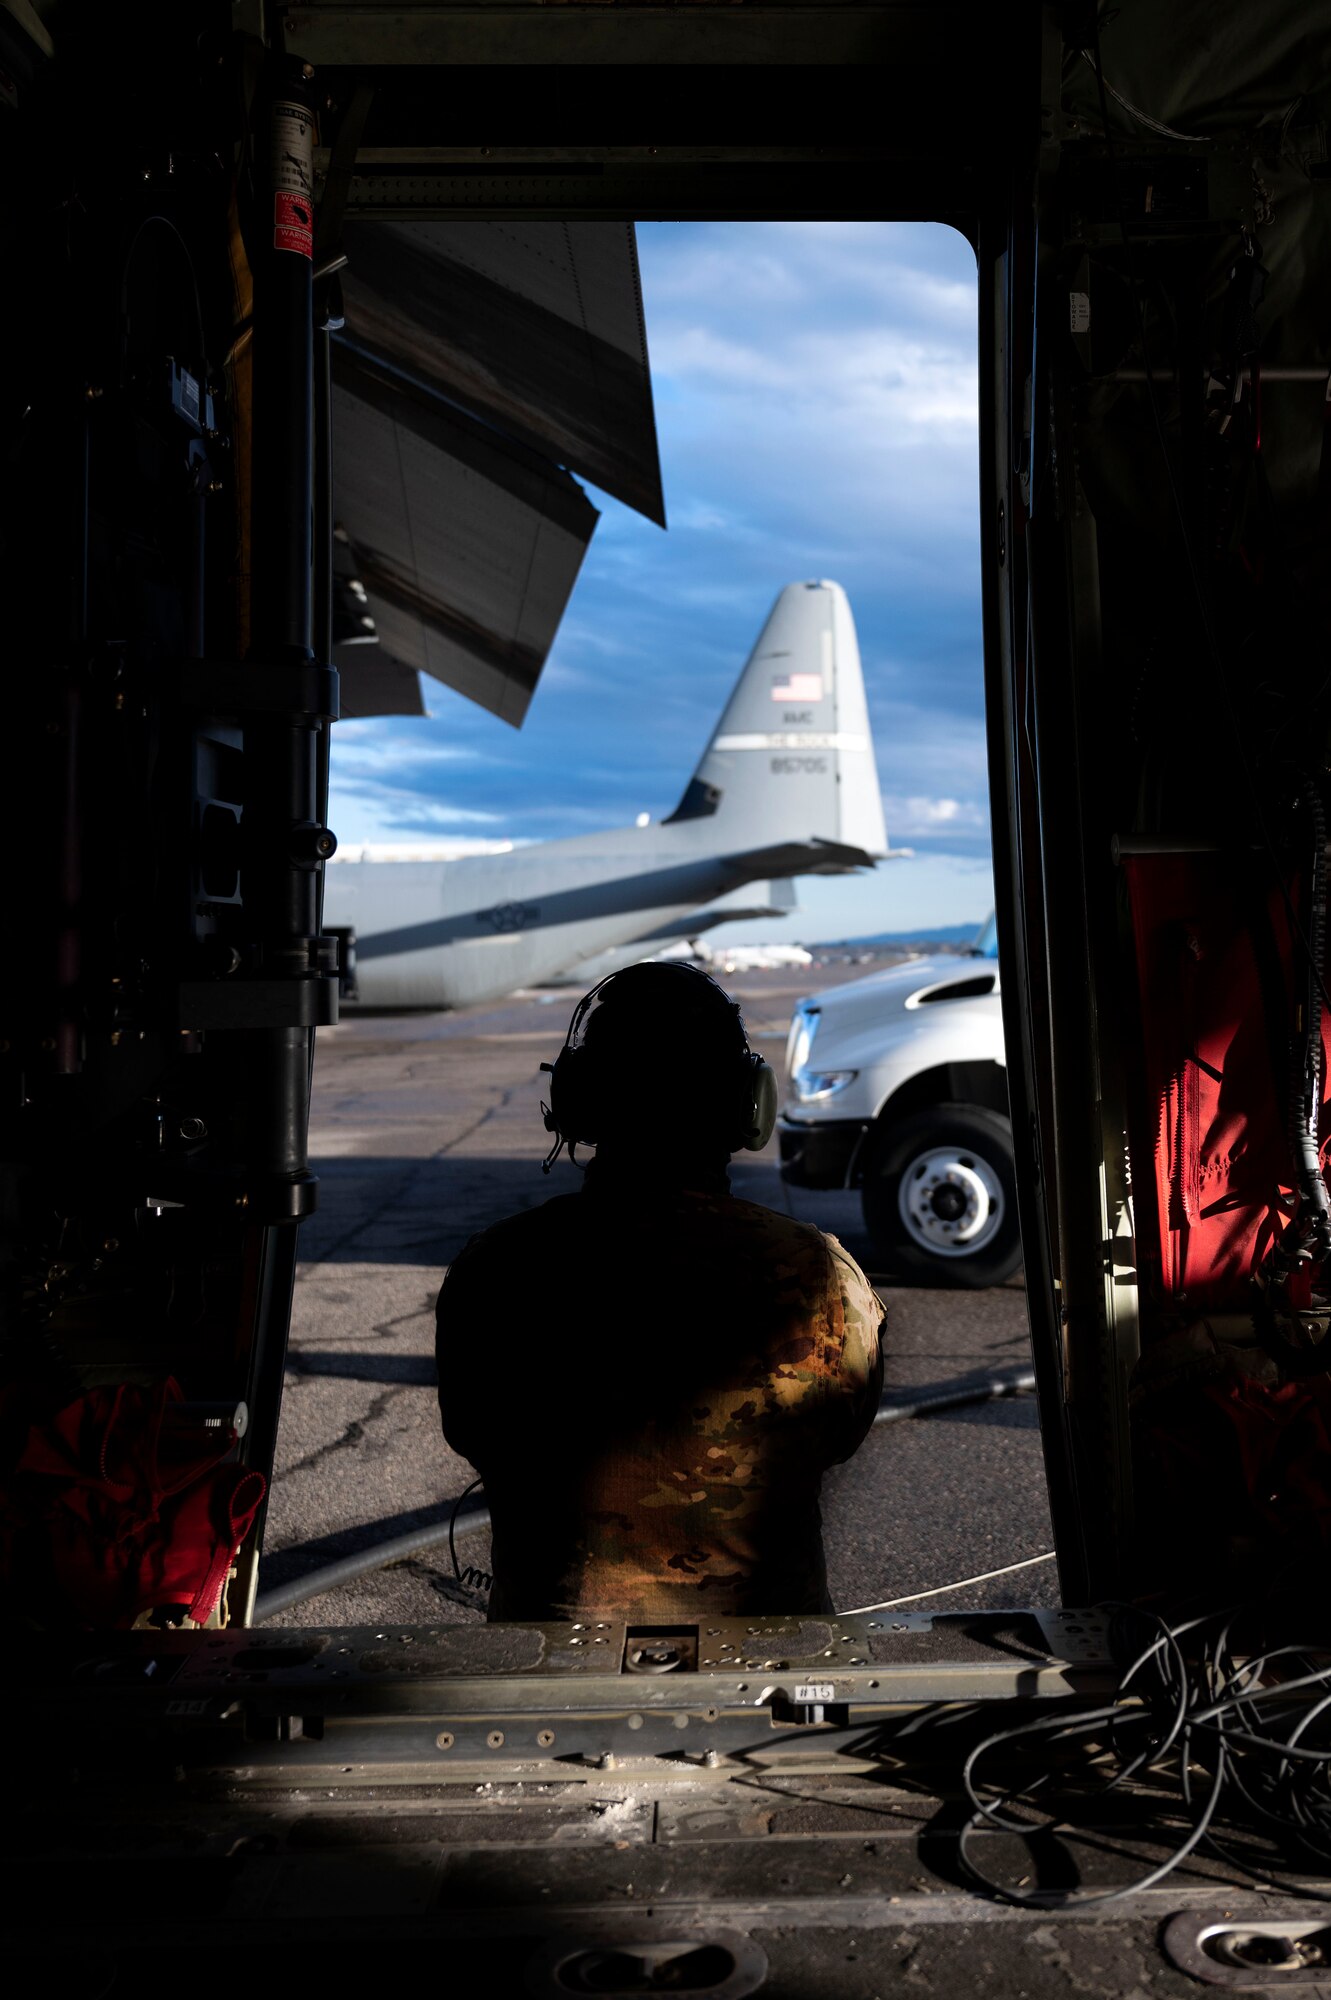 An Airman assigned to the 19th Airlift Wing, waits for a worker at Montrose Regional Airport to finish fueling a C-130J Super Hercules in Montrose, Colorado, July 28, 2020. Support squadrons in addition to the 41st Airlift Squadron trained in Colorado as a part of the 4/12 deployment initiative, which was developed in 2019 between airlift squadrons from Dyess Air Force Base, Texas and Little Rock AFB. The initiative allows for each squadron a full year of dwell time followed by a four-month rotation to their respective area of responsibility. (U.S. Air Force photo by Senior Airman Kristine M. Gruwell)